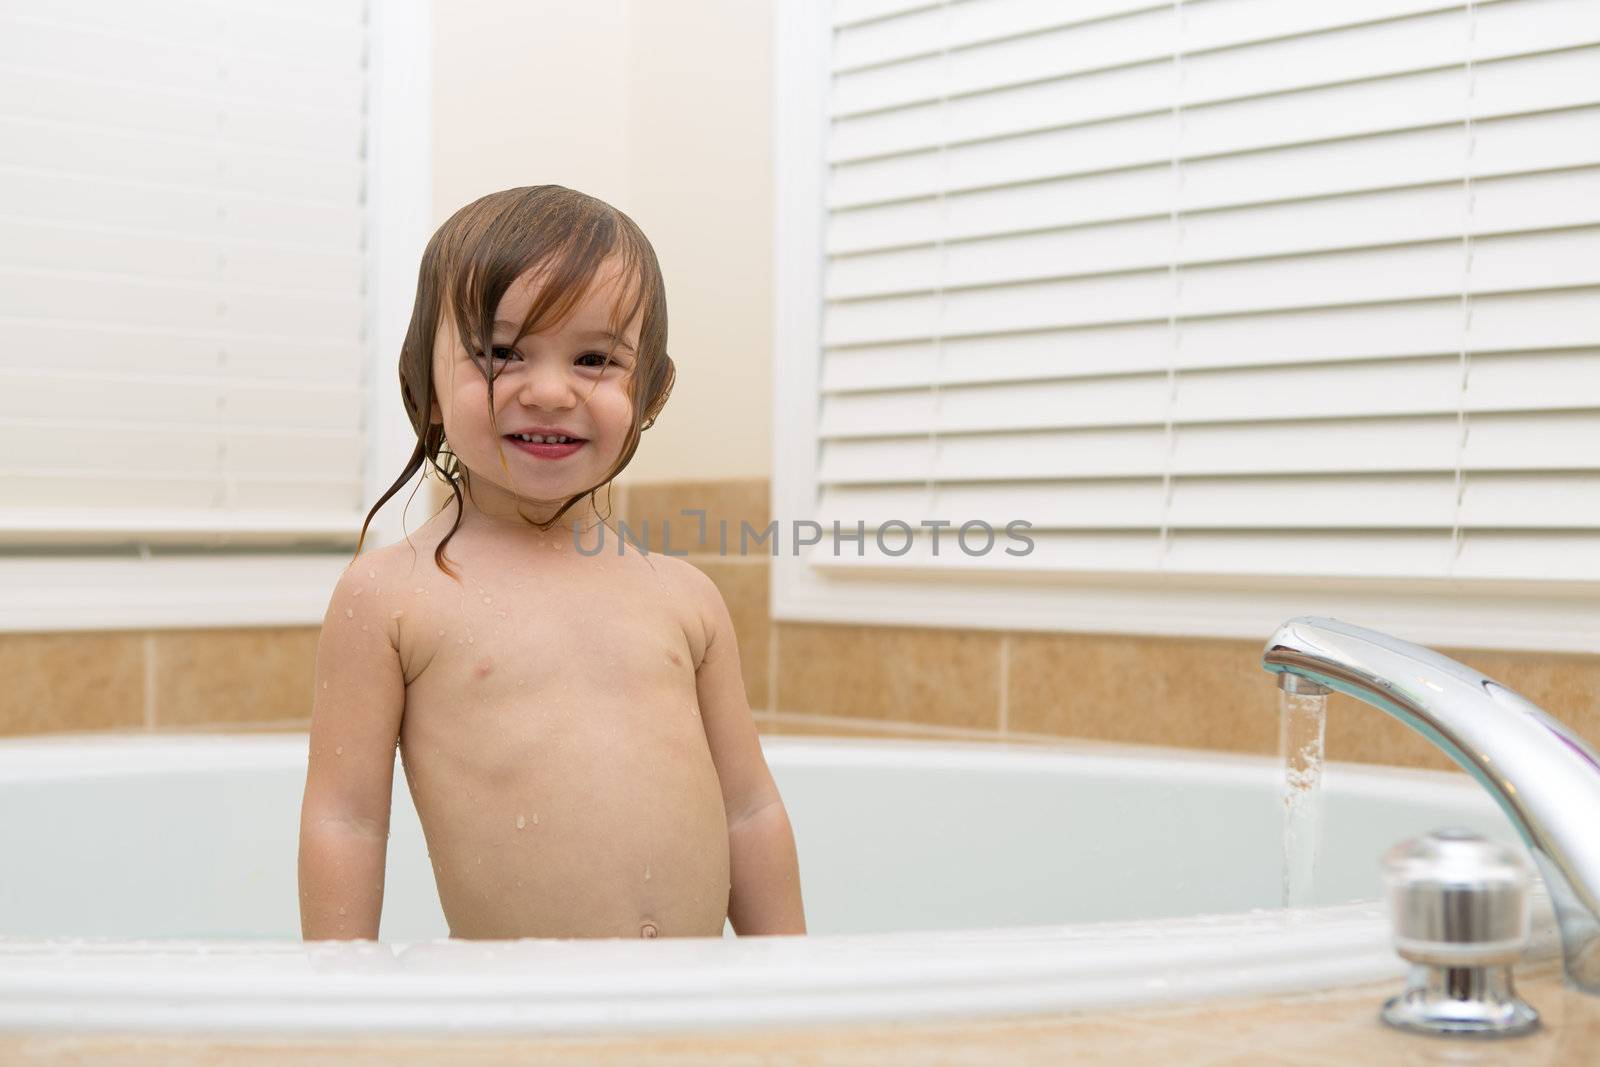 Toddler girl smiling trustfully from bath tub. Water coming from the bath tub faucet.